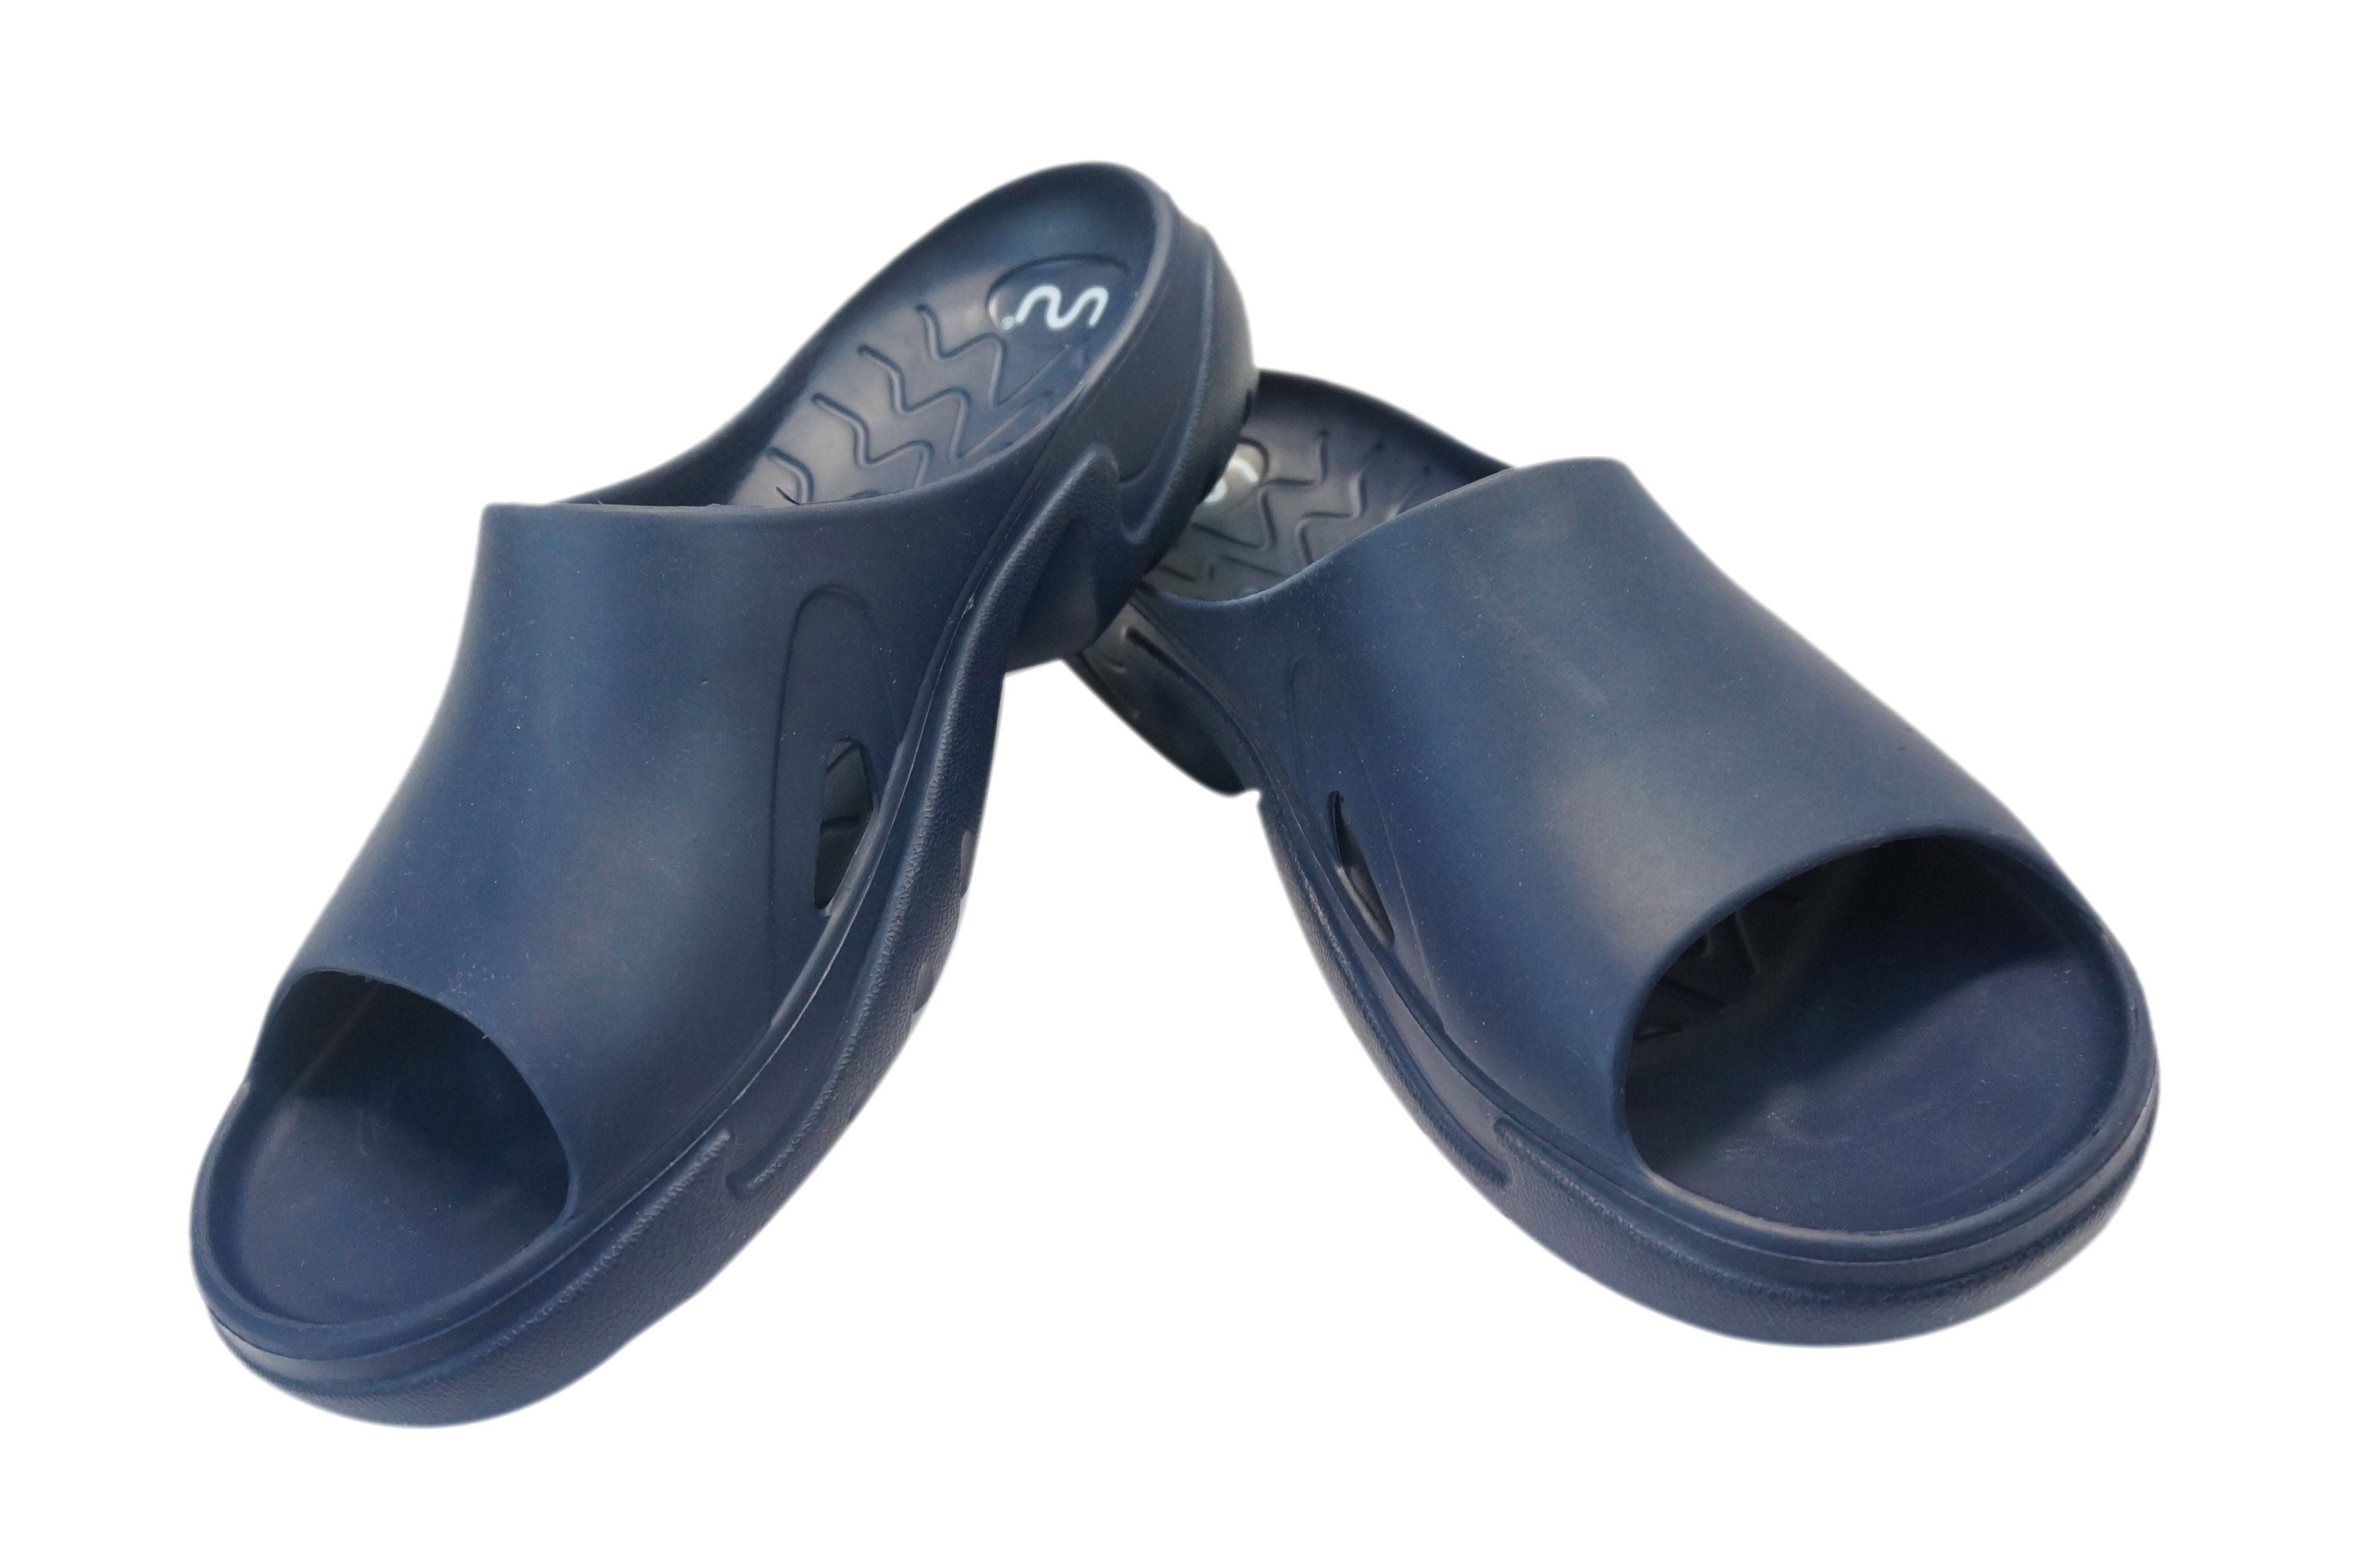 Doubleu Roma Slider for Men Comfortable Recovery Footwear (Does Not Shrink) (Navy Blue)